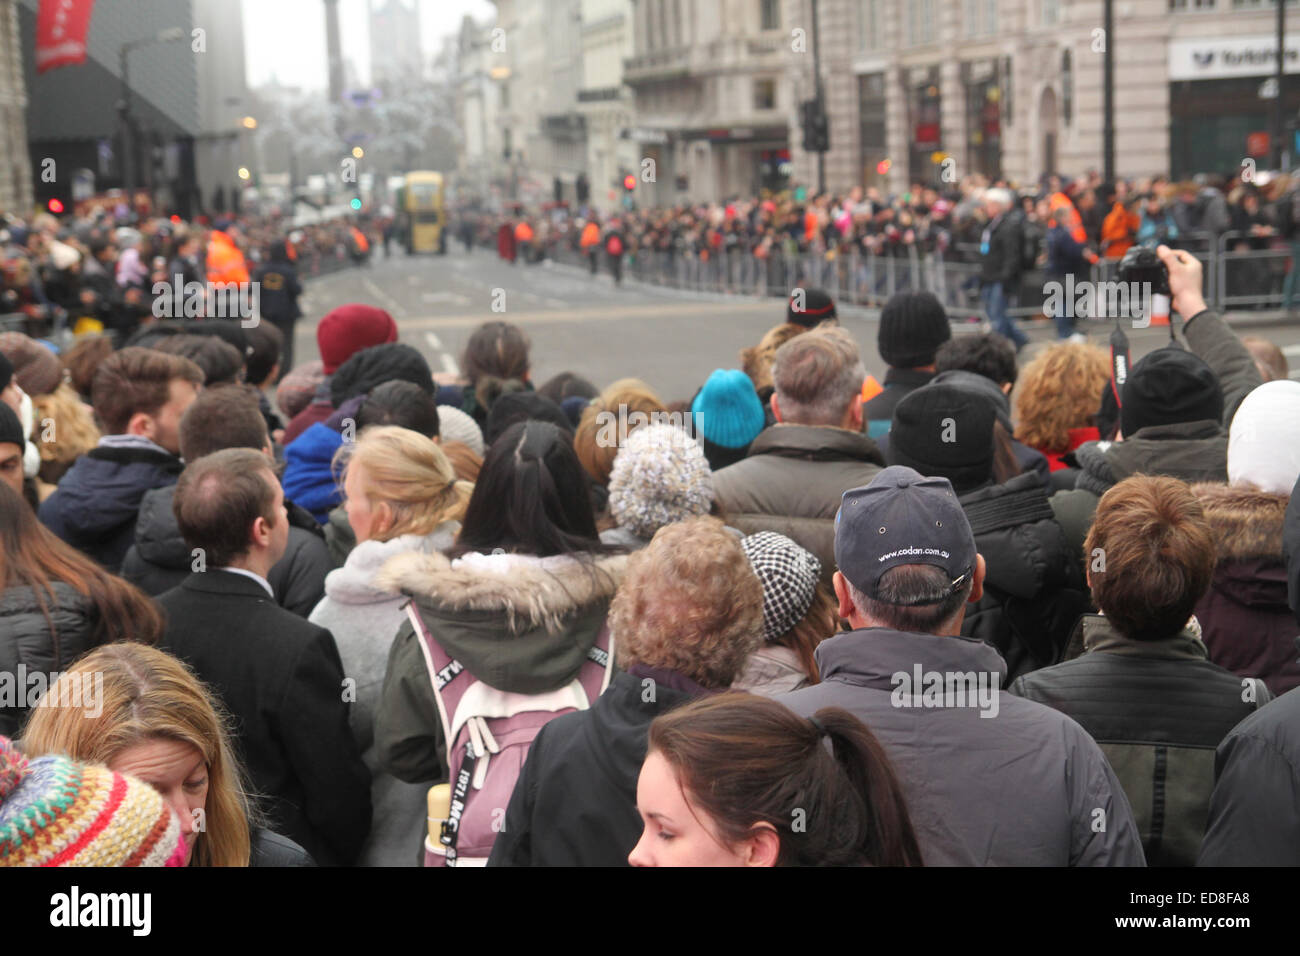 London, UK. 1 January 2015. Londoners and tourists turned up in droves for the new years parade. The annual parade goes through Piccadilly, Regents street, Pall Mall and Whitehall a 2 mile route. Photo: David Mbiyu/ Alamy Live News Stock Photo